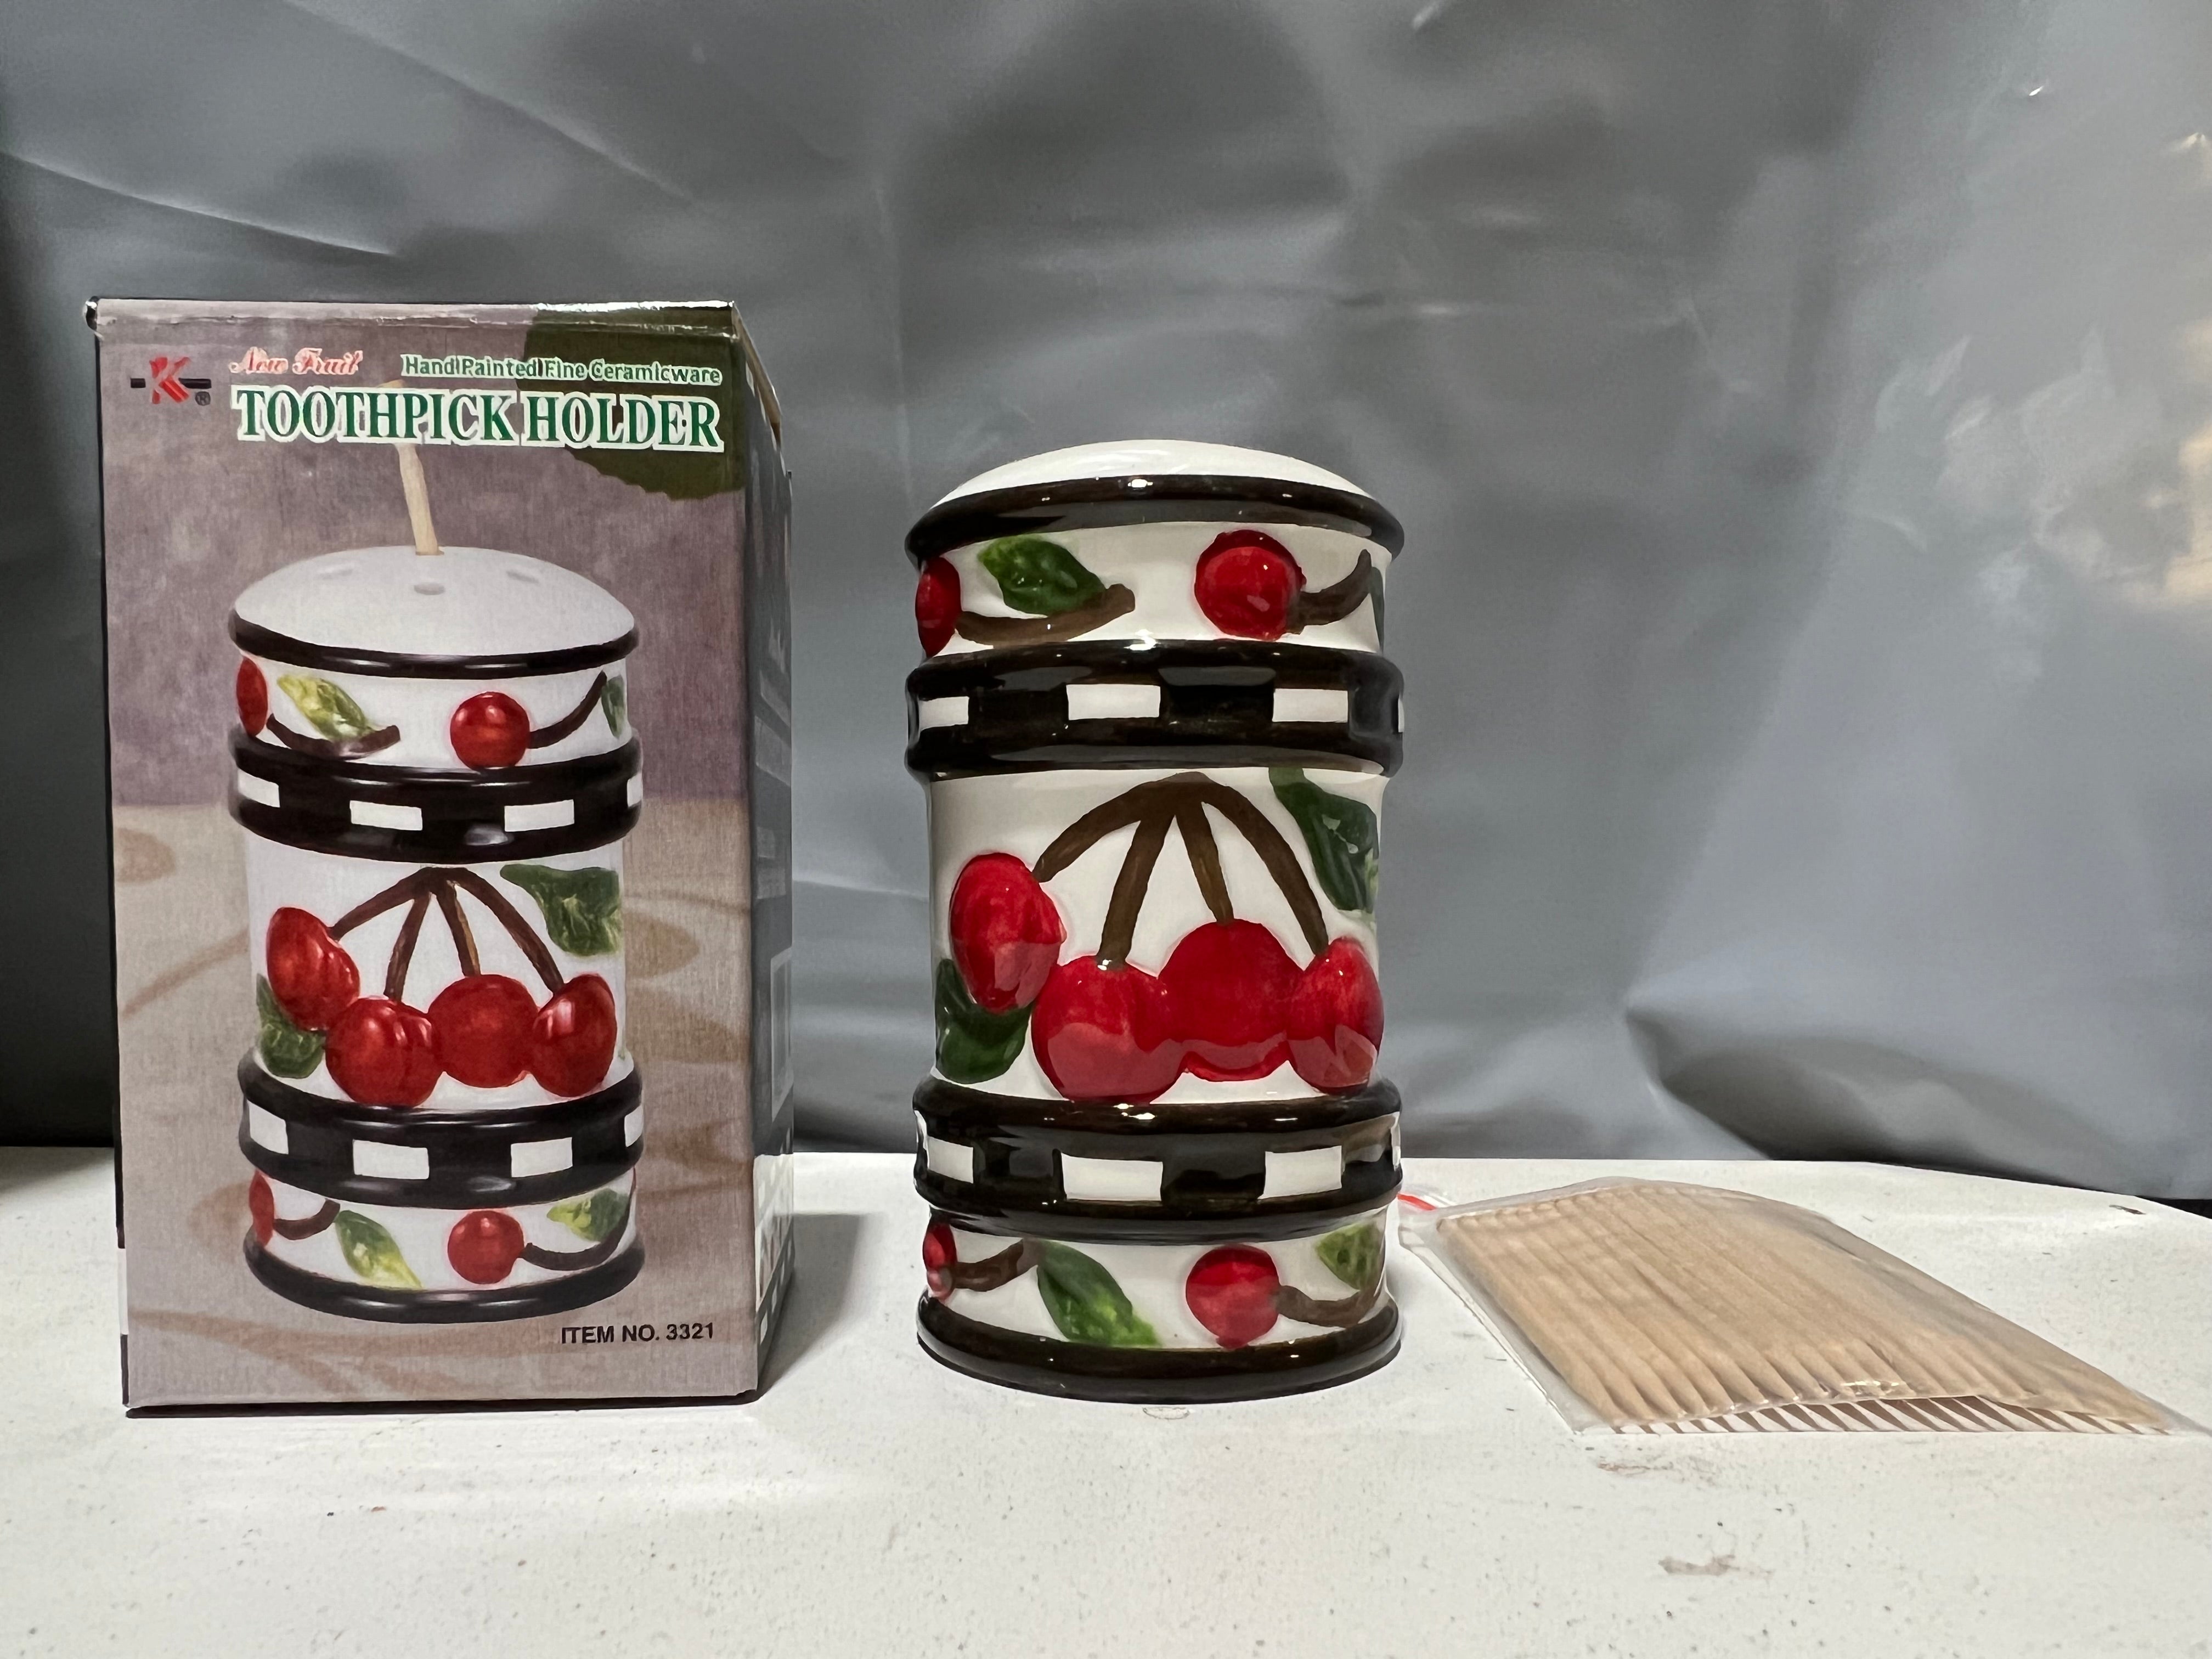 Fruit 3321 Hand Painted Fine Ceramicware Toothpick Holder With 20 Toothpicks